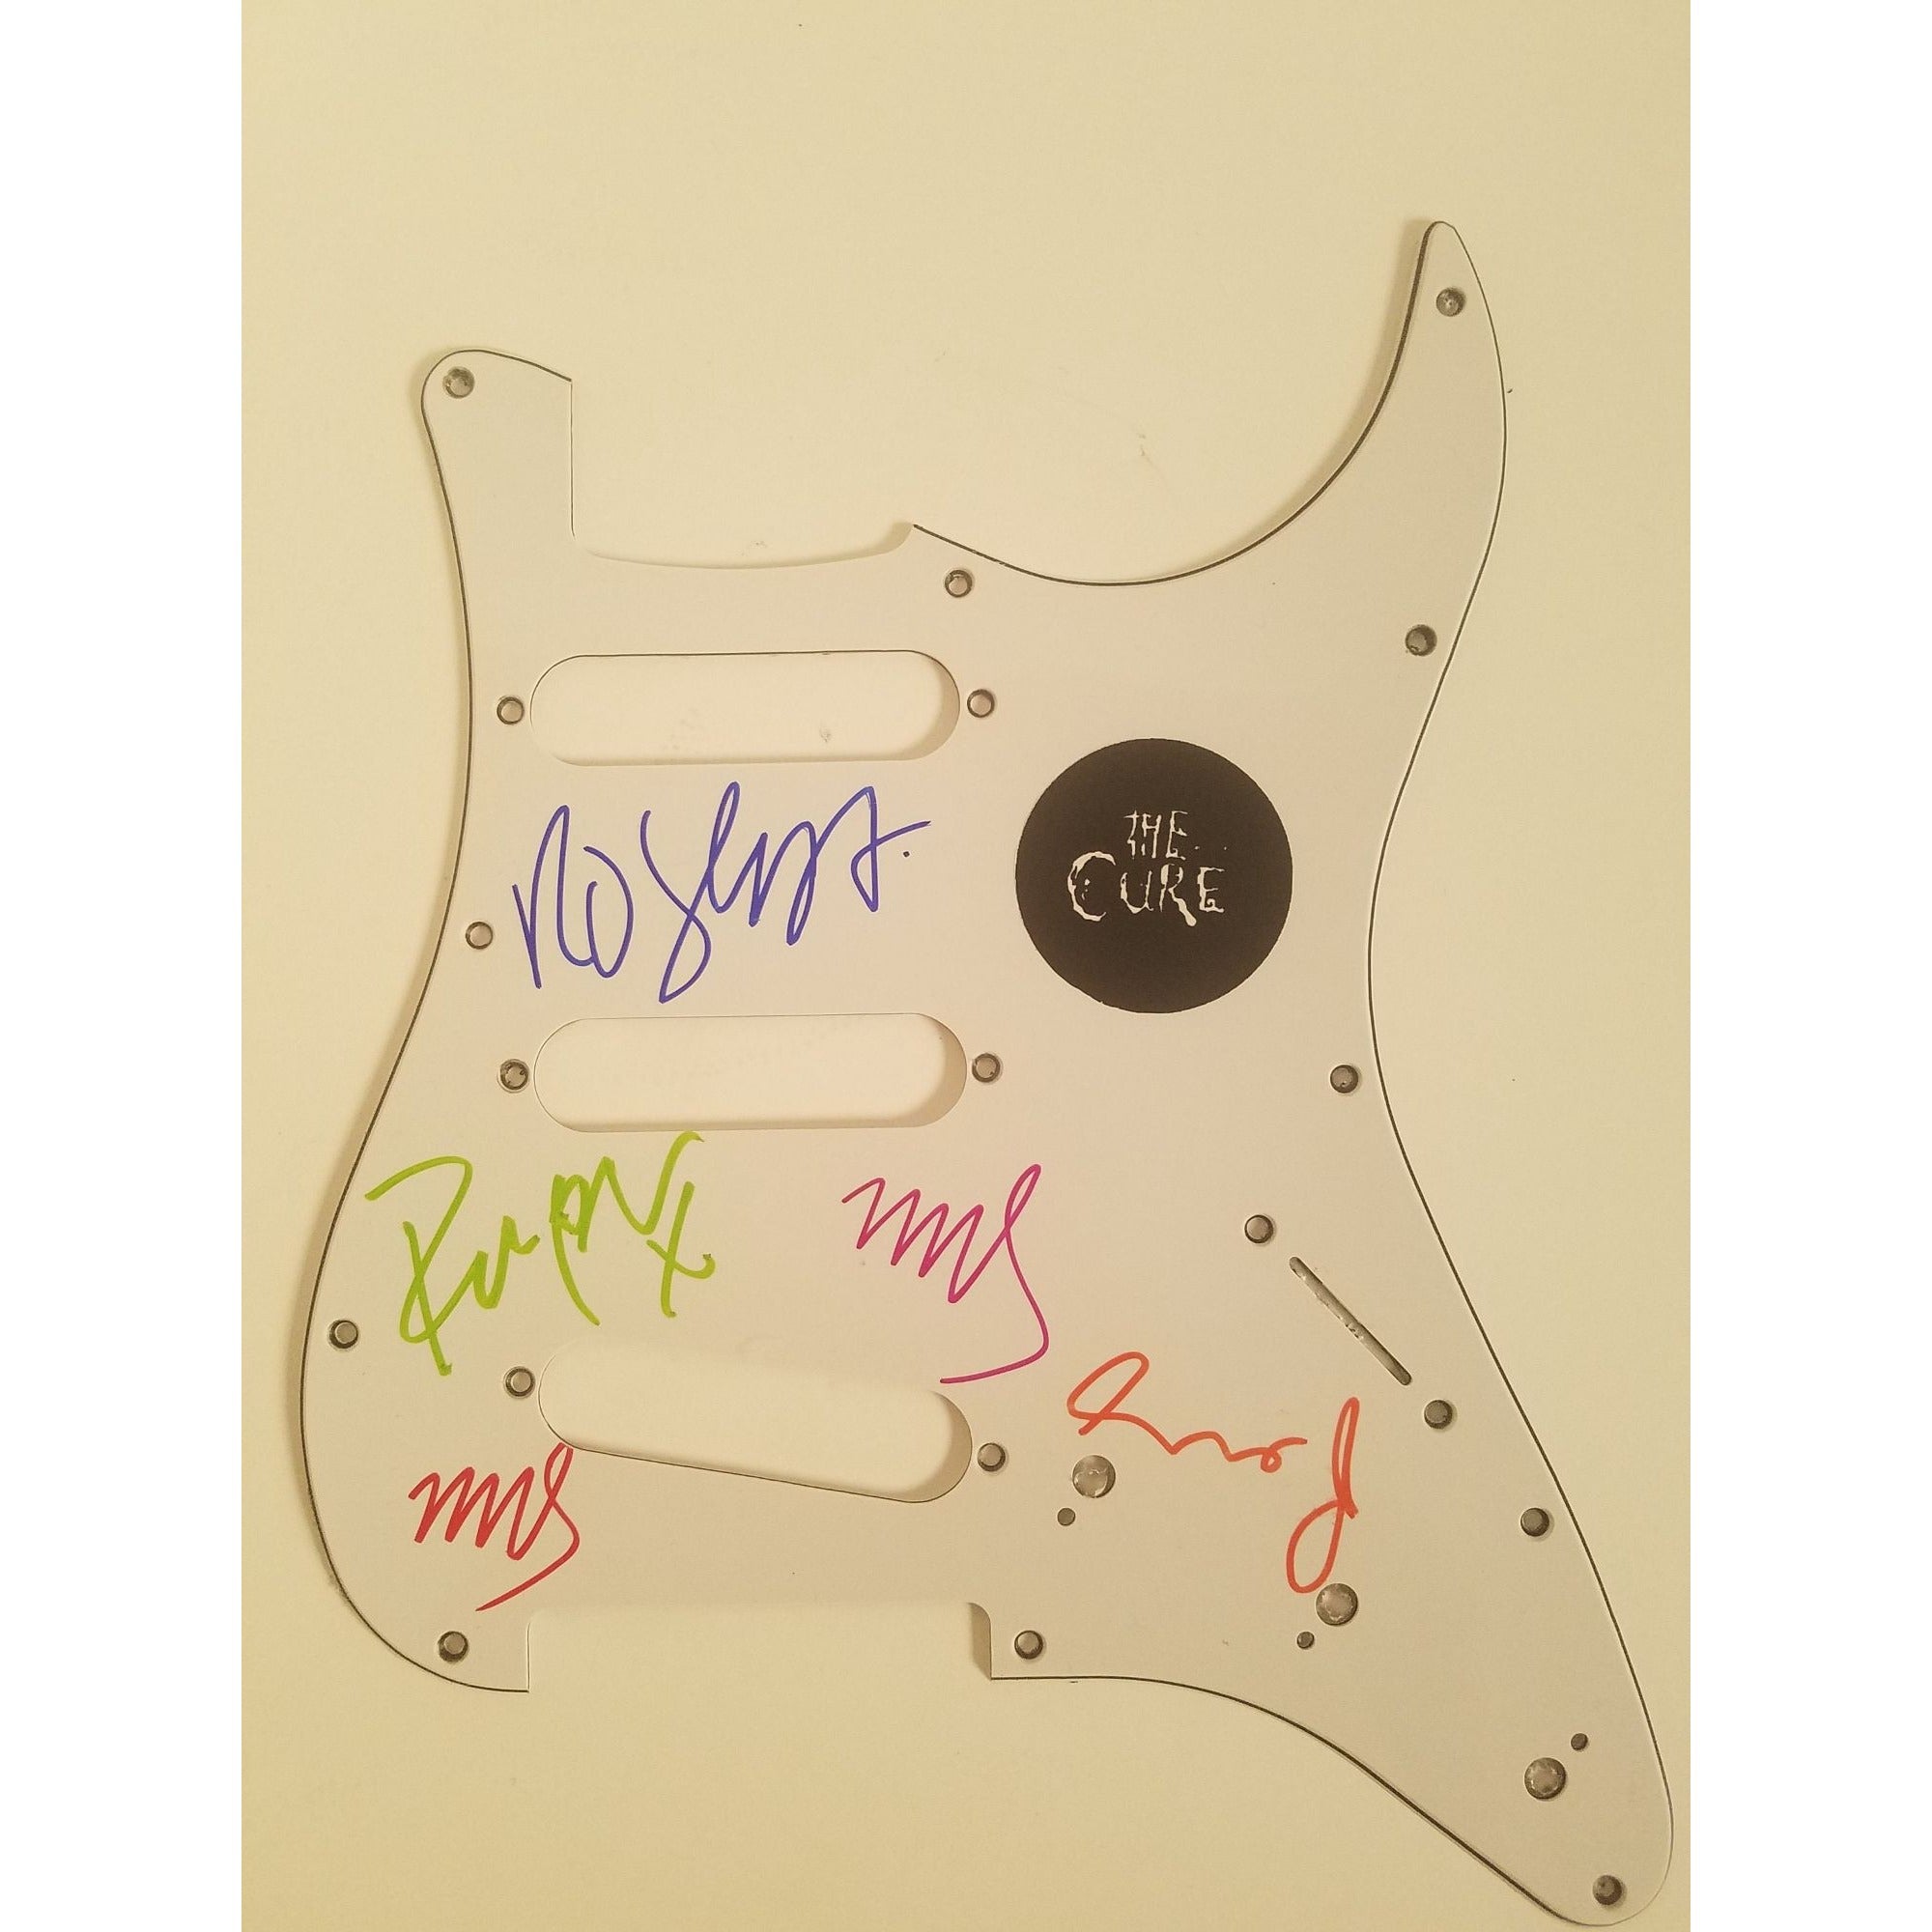 Robert Smith and the Cure signed guitar pickguard with proo